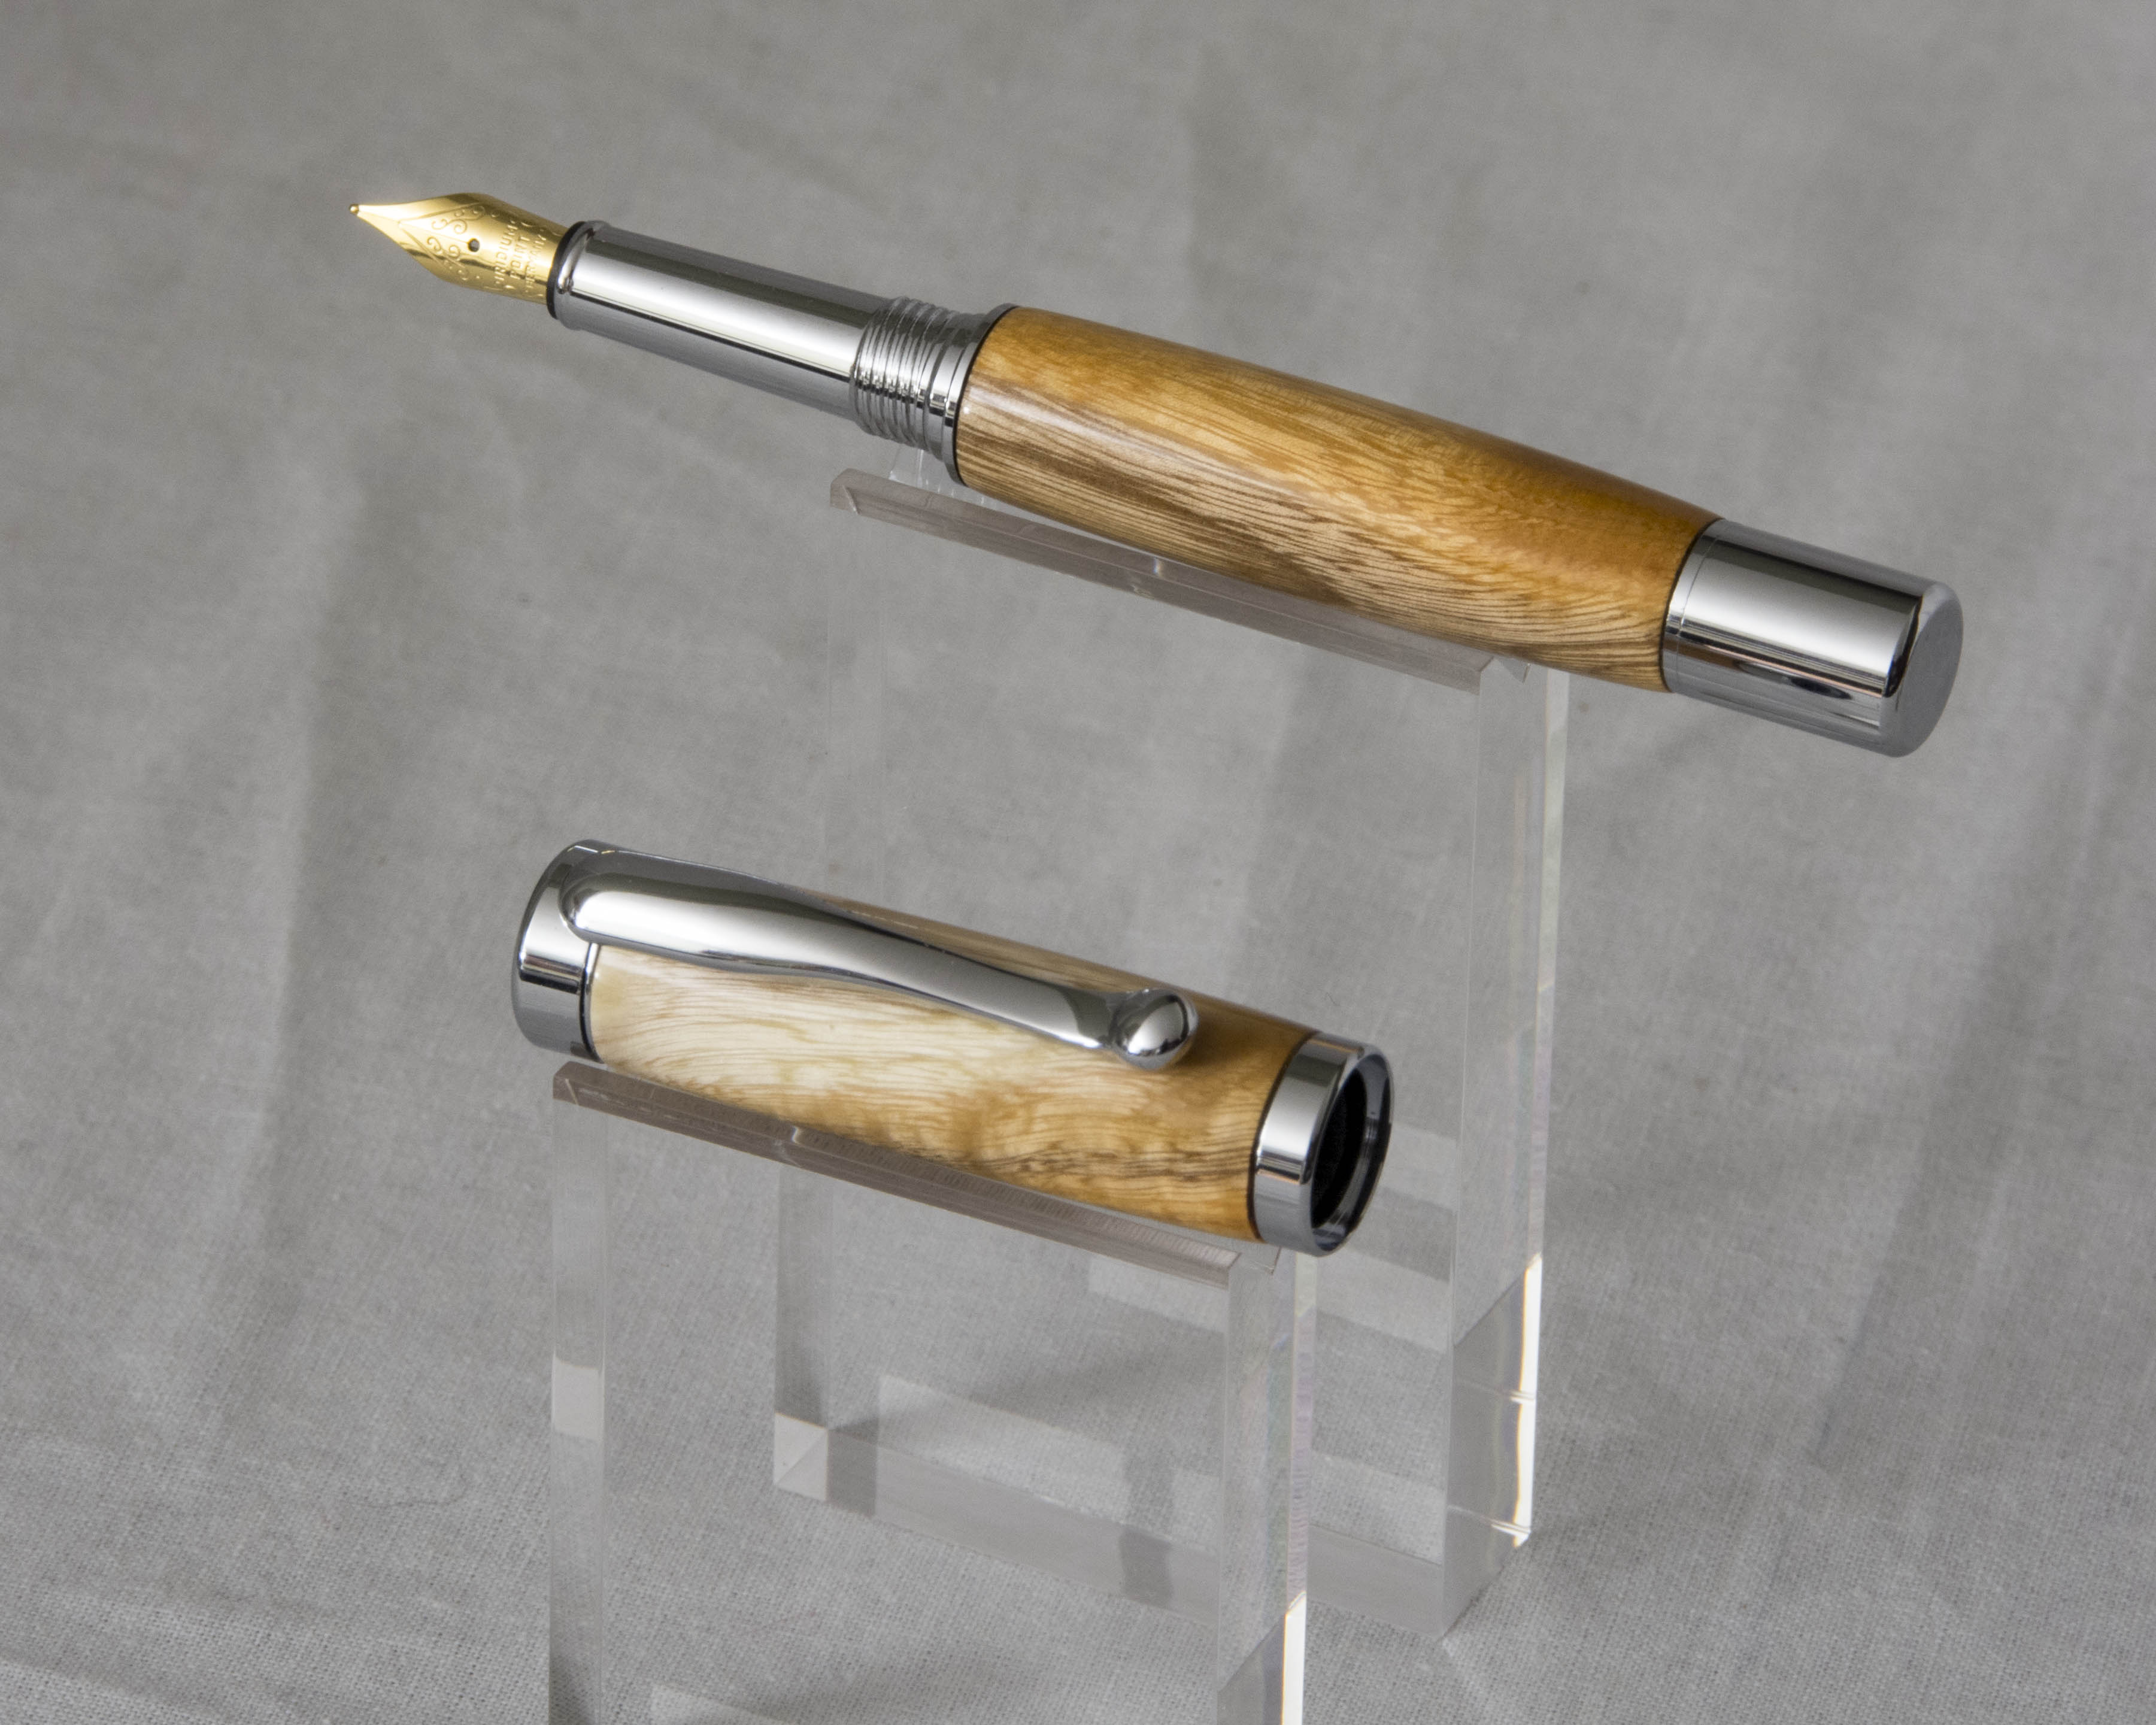 One Roller Ball and Two Fountain Pen from Woodcraft